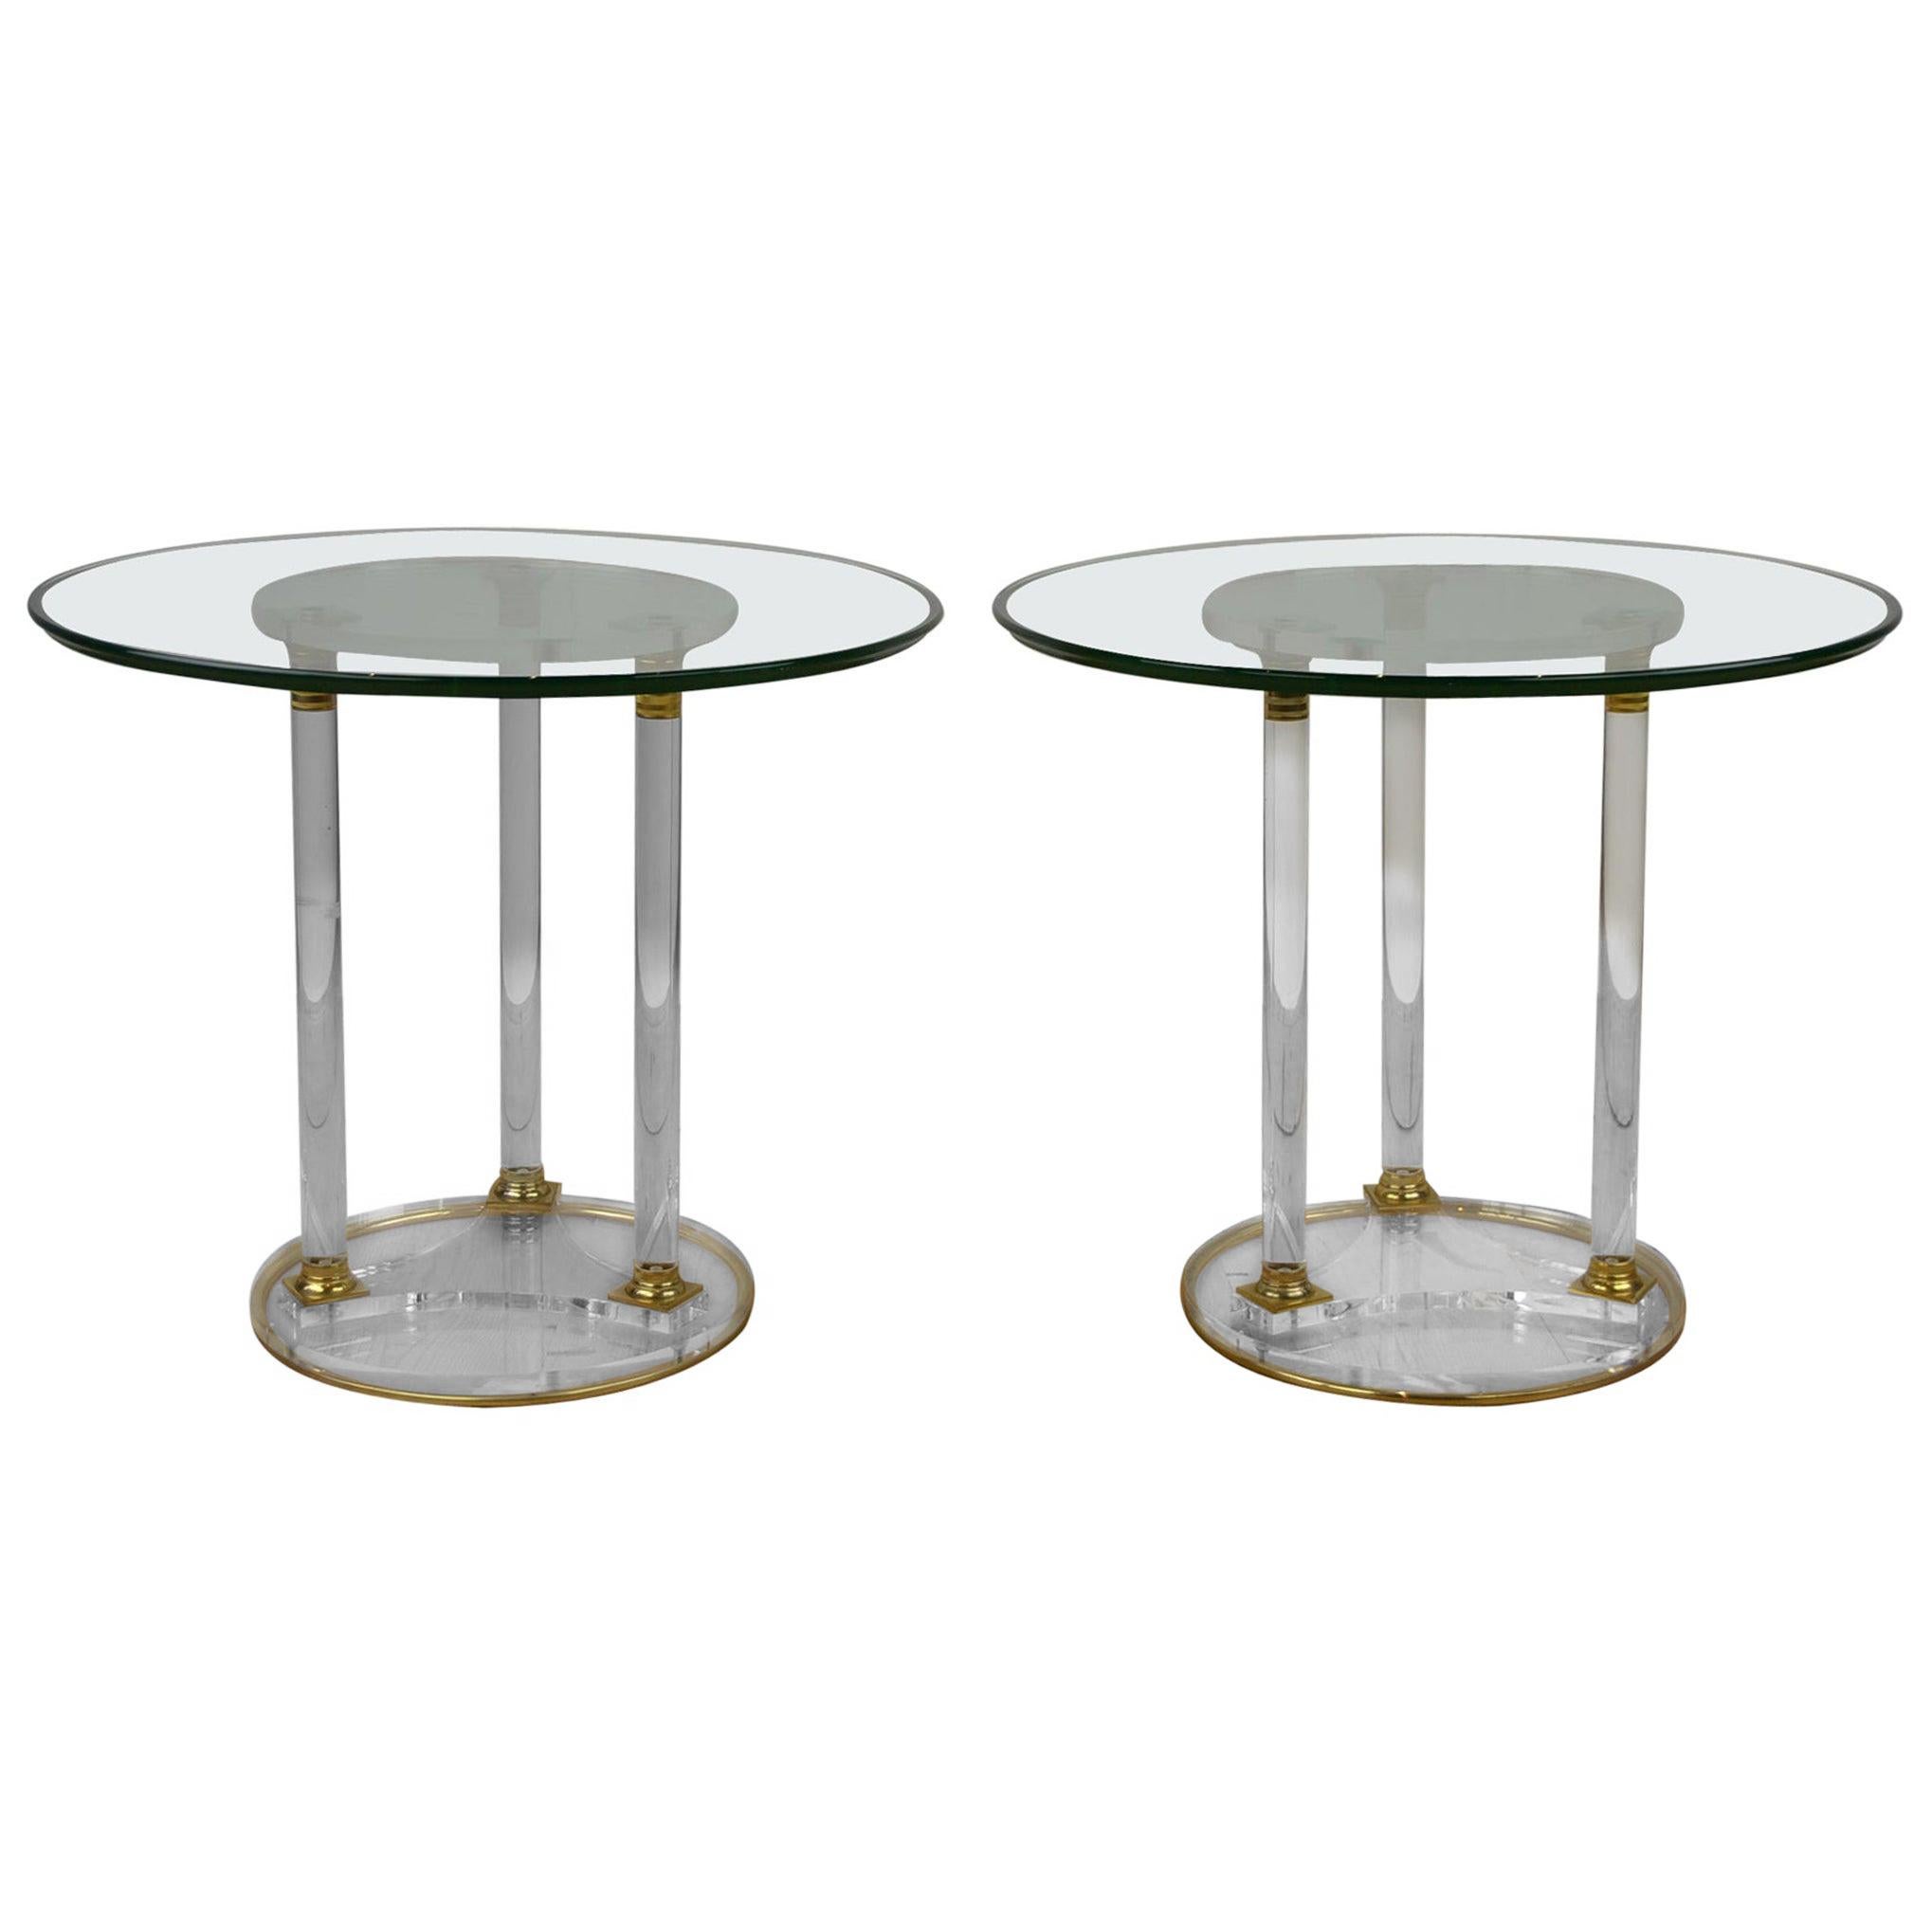 Pair of Round Lucite Side Tables, French Modern Design Tables , 1970s For Sale